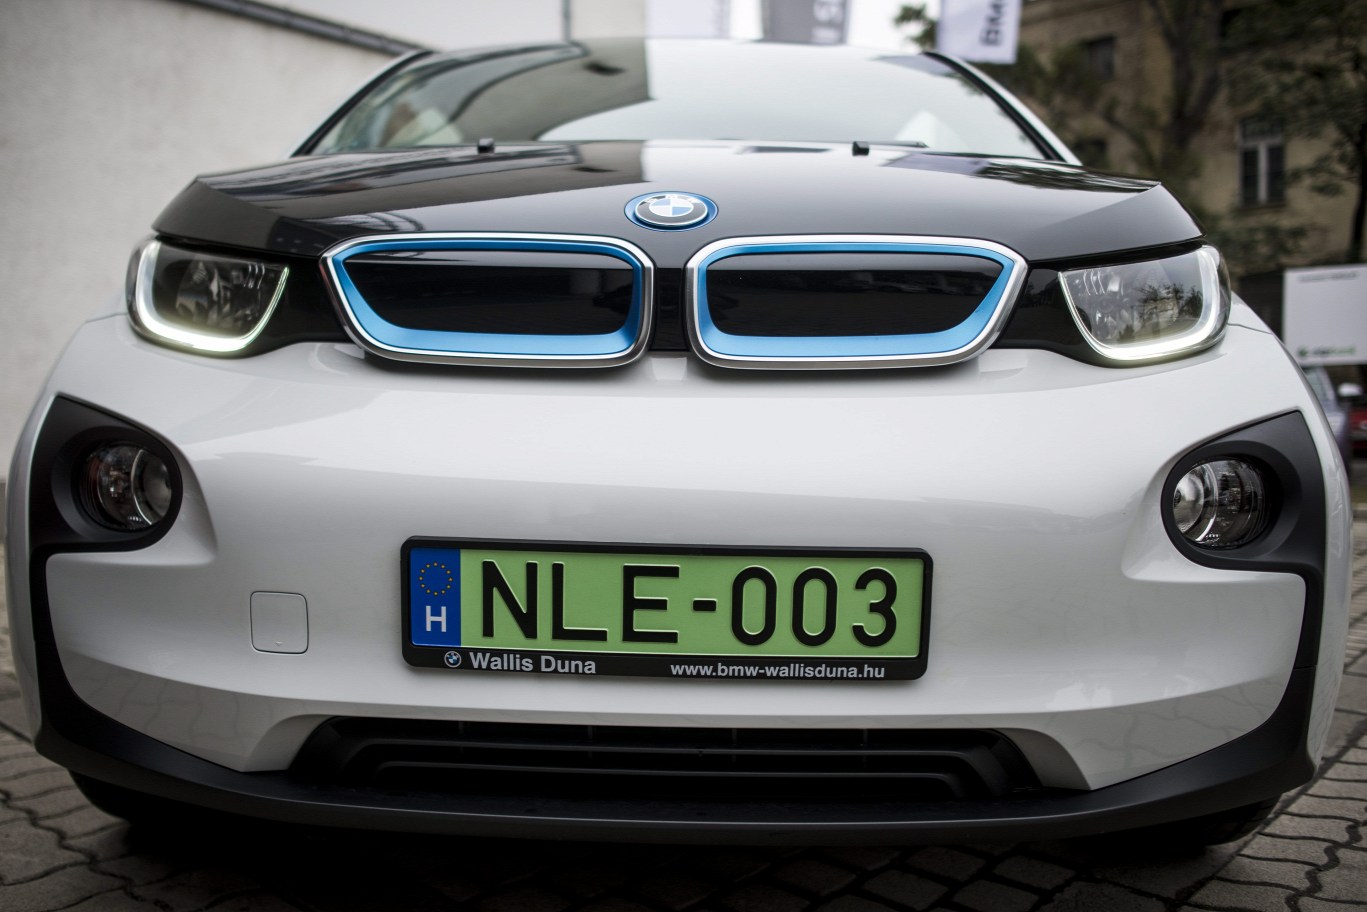 Green Plates to Be Withdrawn From Hybrid Cars in Hungary